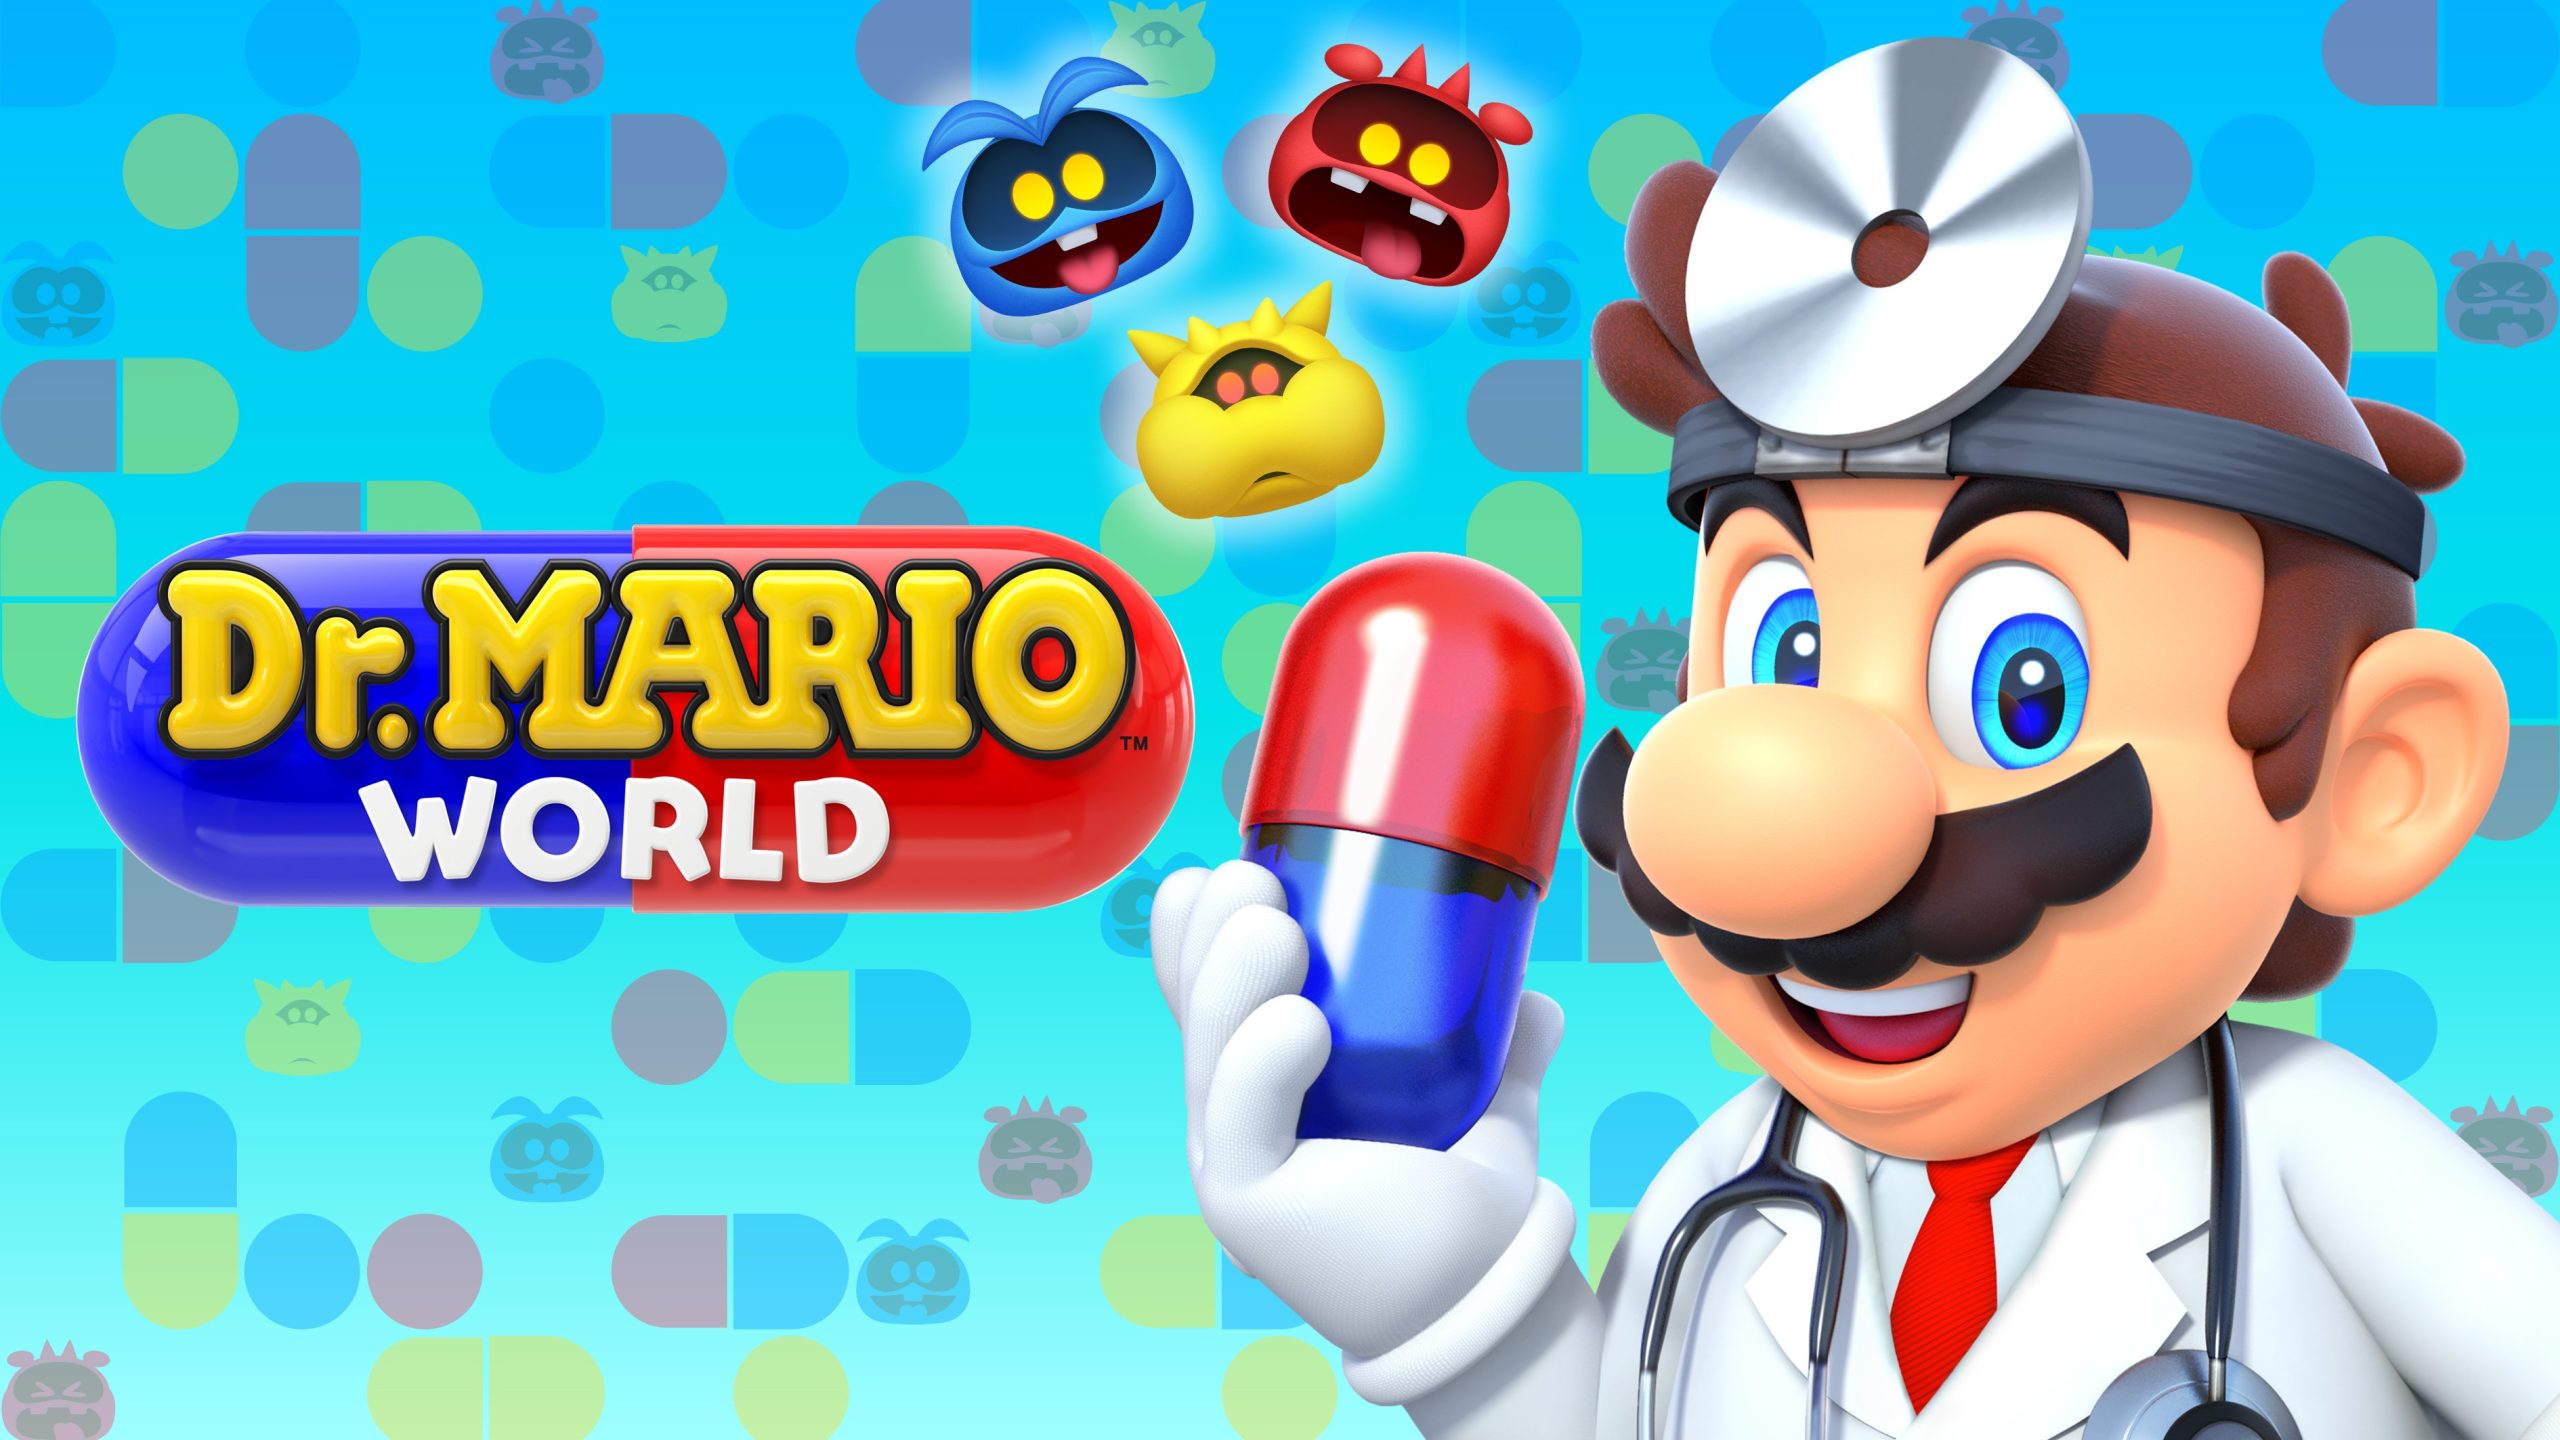 Dr Mario World checks us in on July 10